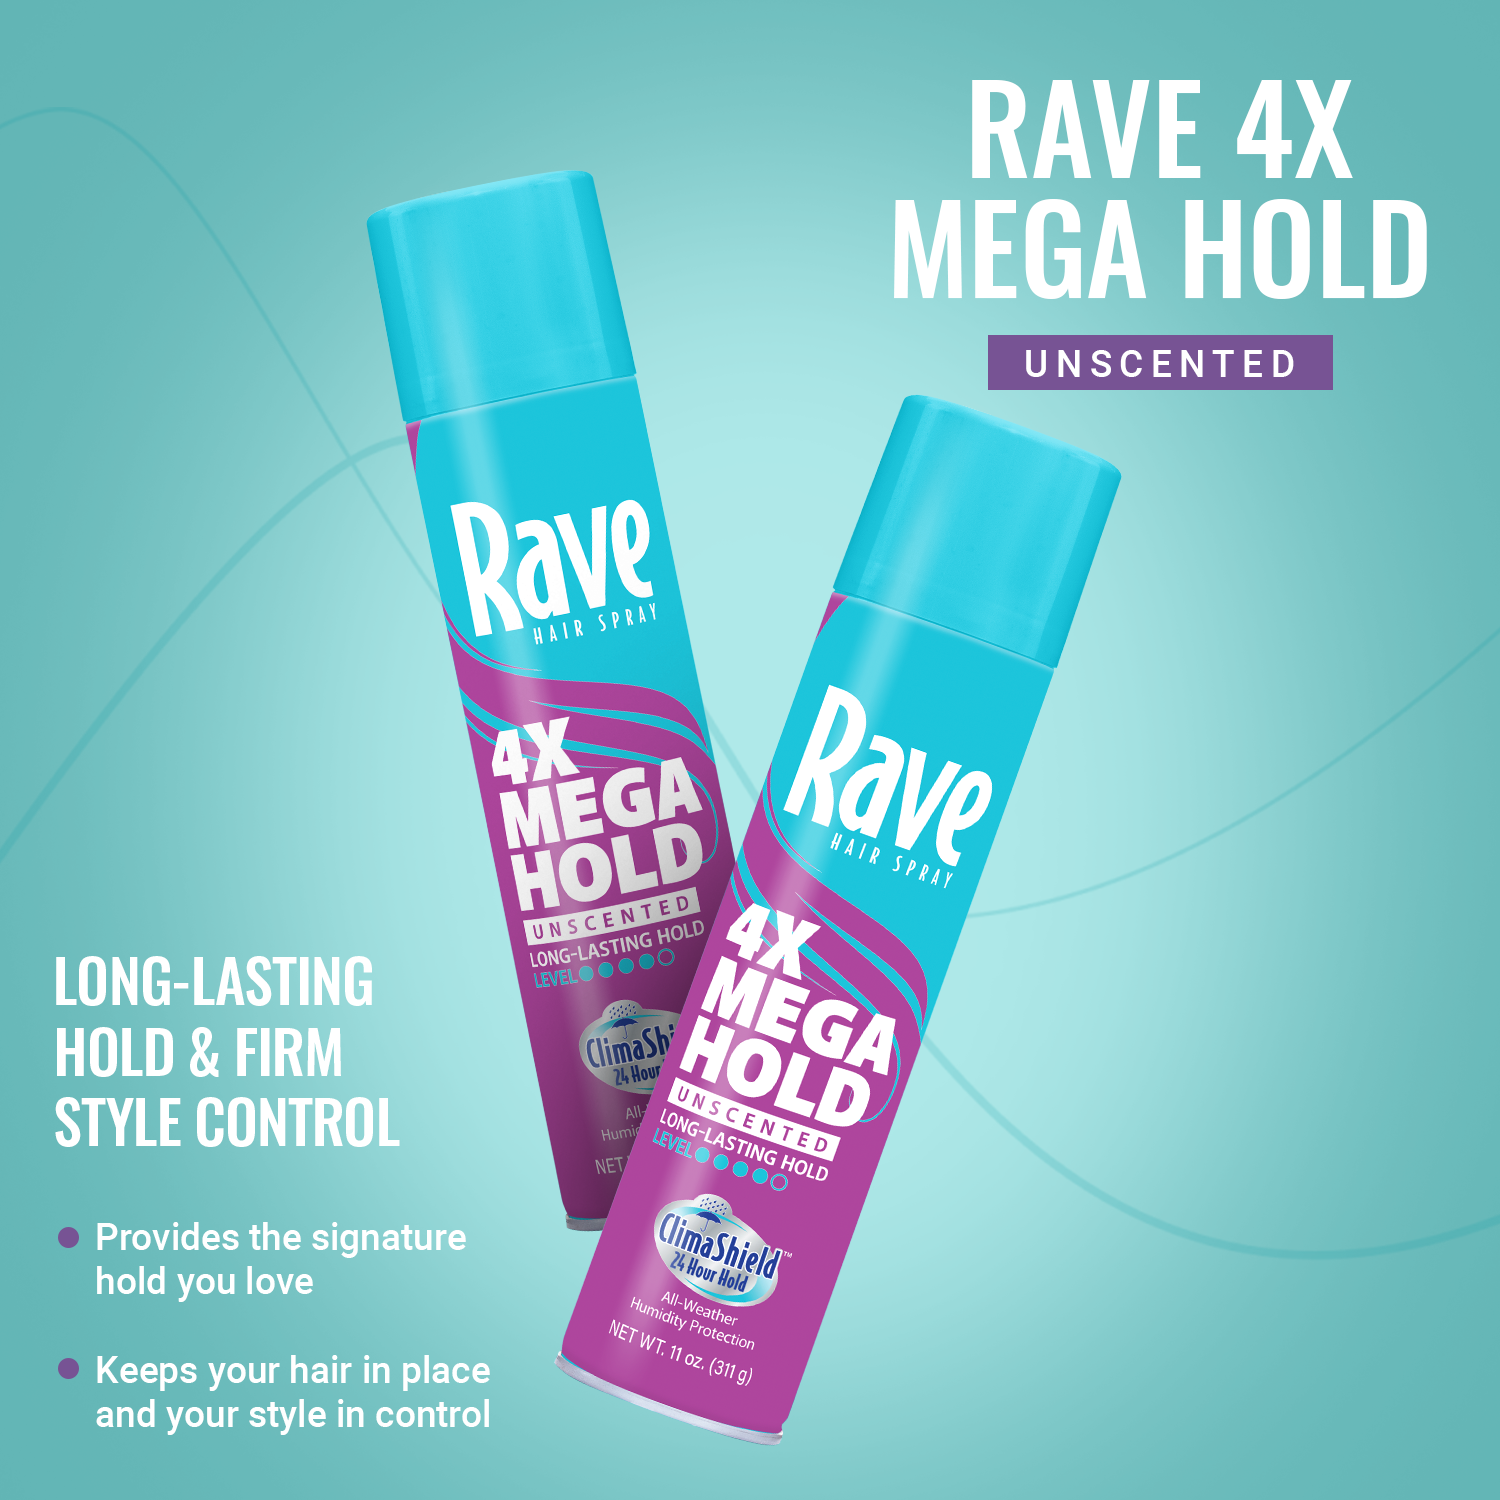 Rave 4X Mega Hold Hair Spray, All-Weather Protection with Vitamin-Rich Formula, 11 oz - image 4 of 8